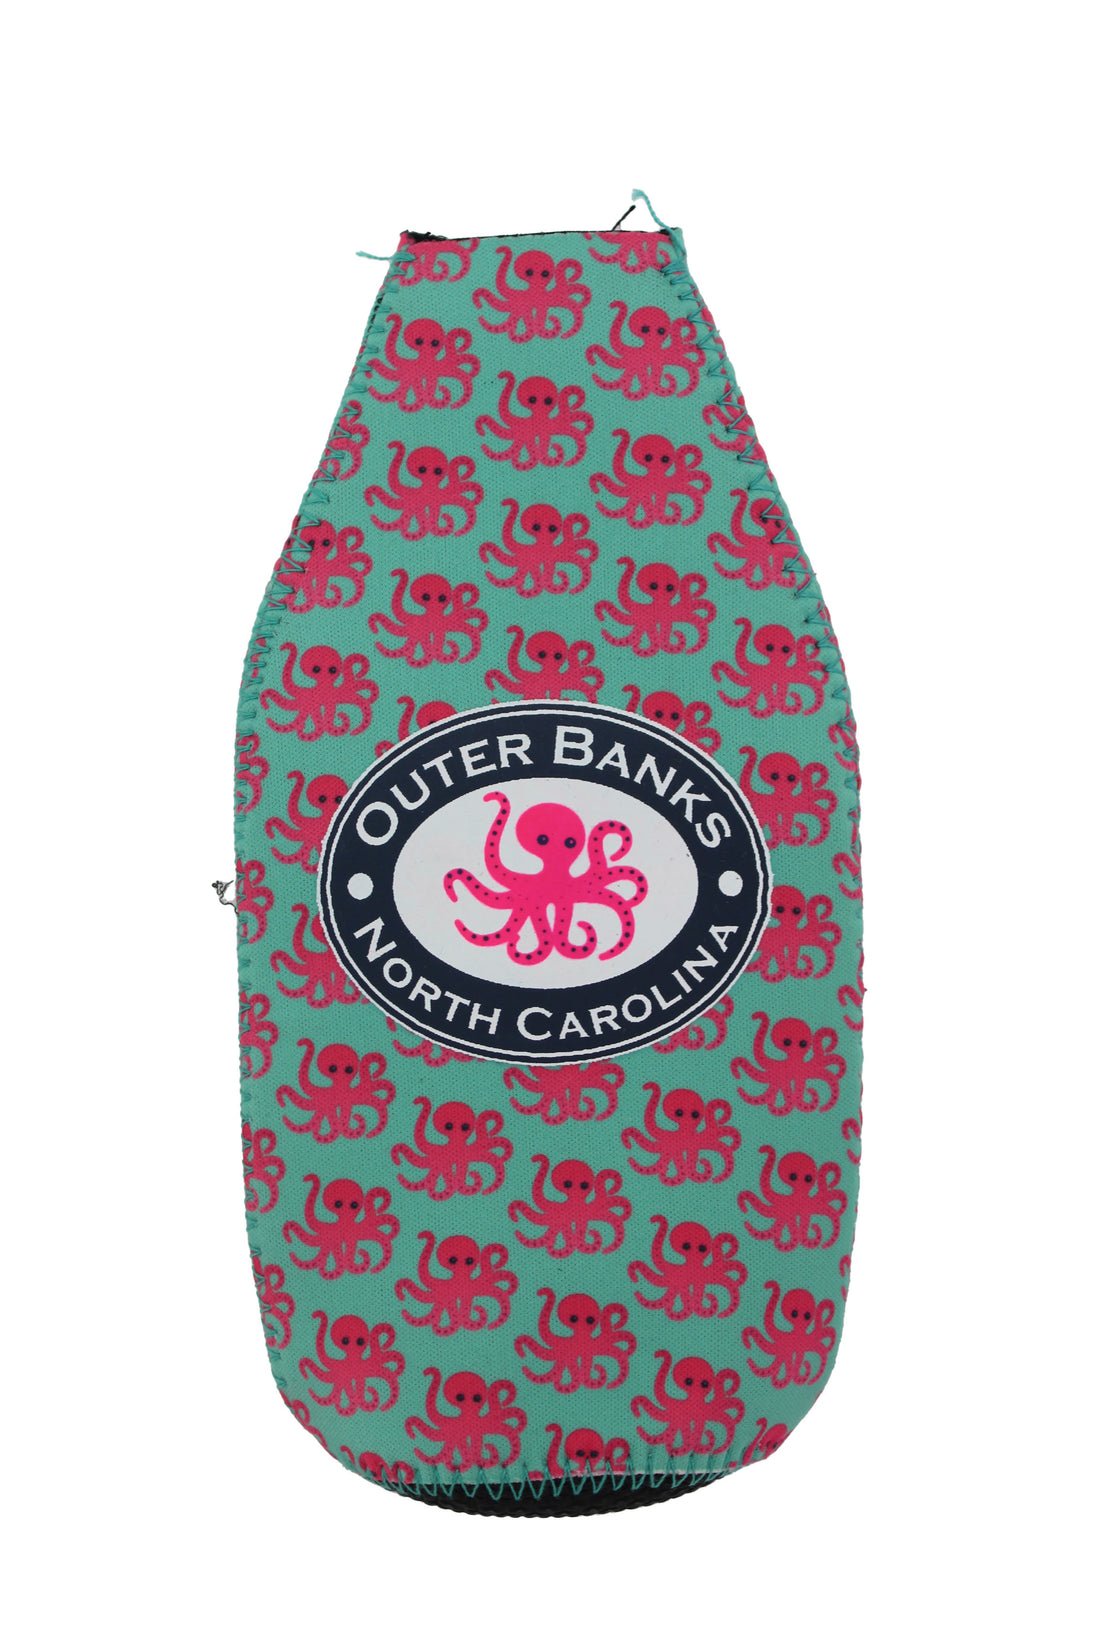 OBX OCTOPUS PARTY POPPER  KOOZIE